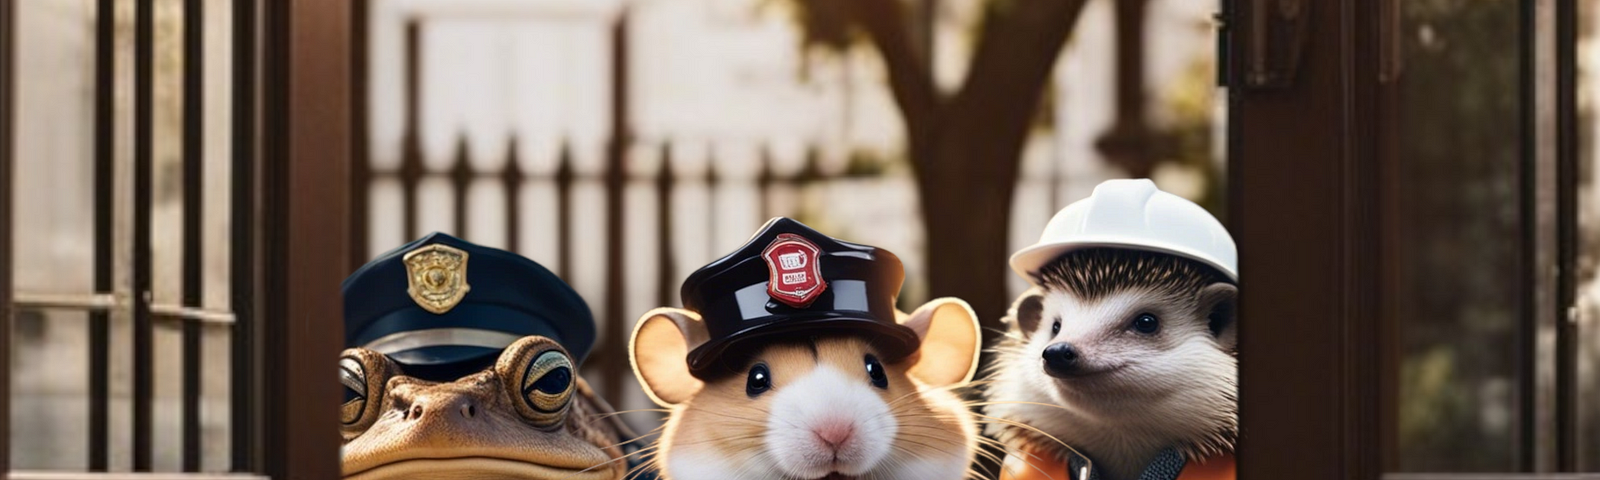 A hamster, a toad, and a hedgehog in stripper costumes